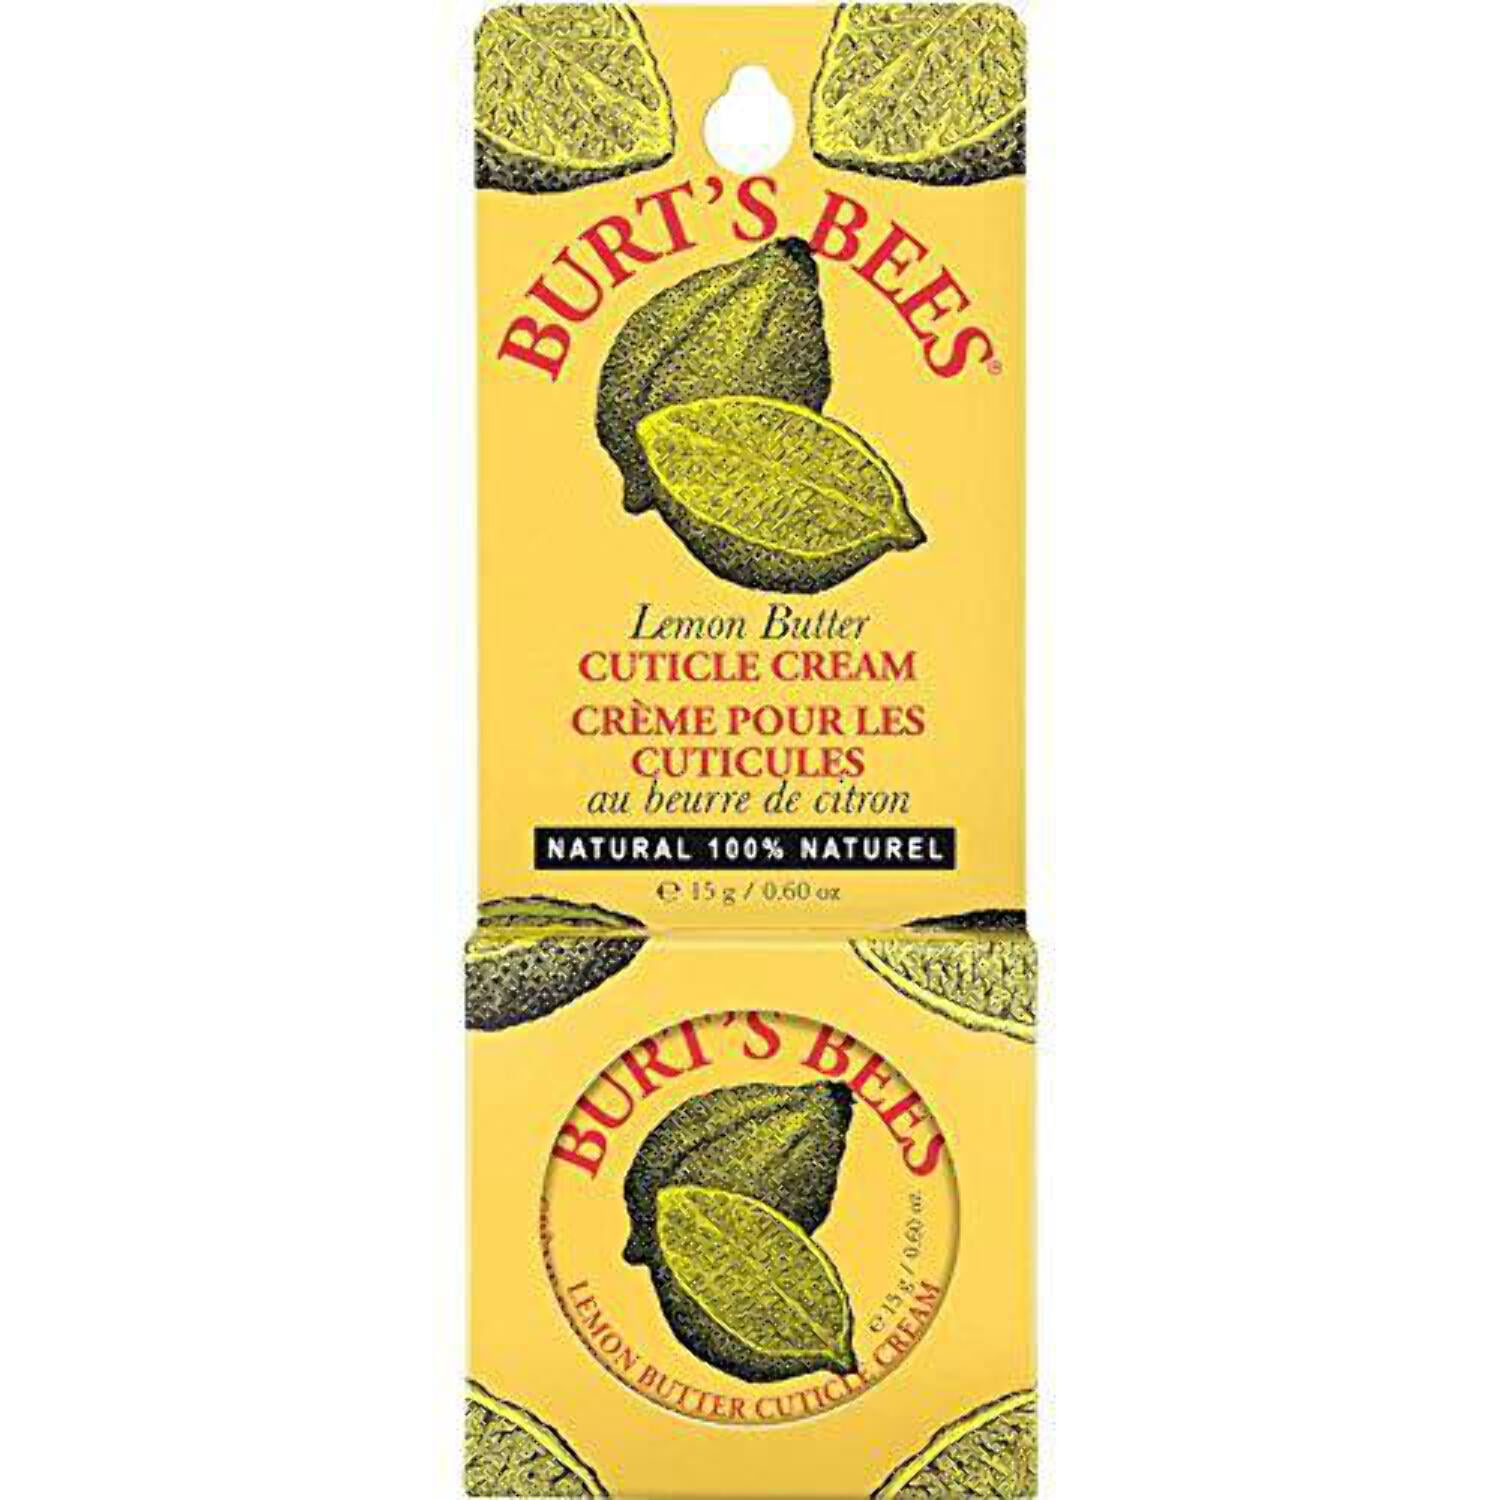 Burt's Bees Lemon Butter Cuticle Creme, 0.6-Ounce Tin (Pack of 3 ...